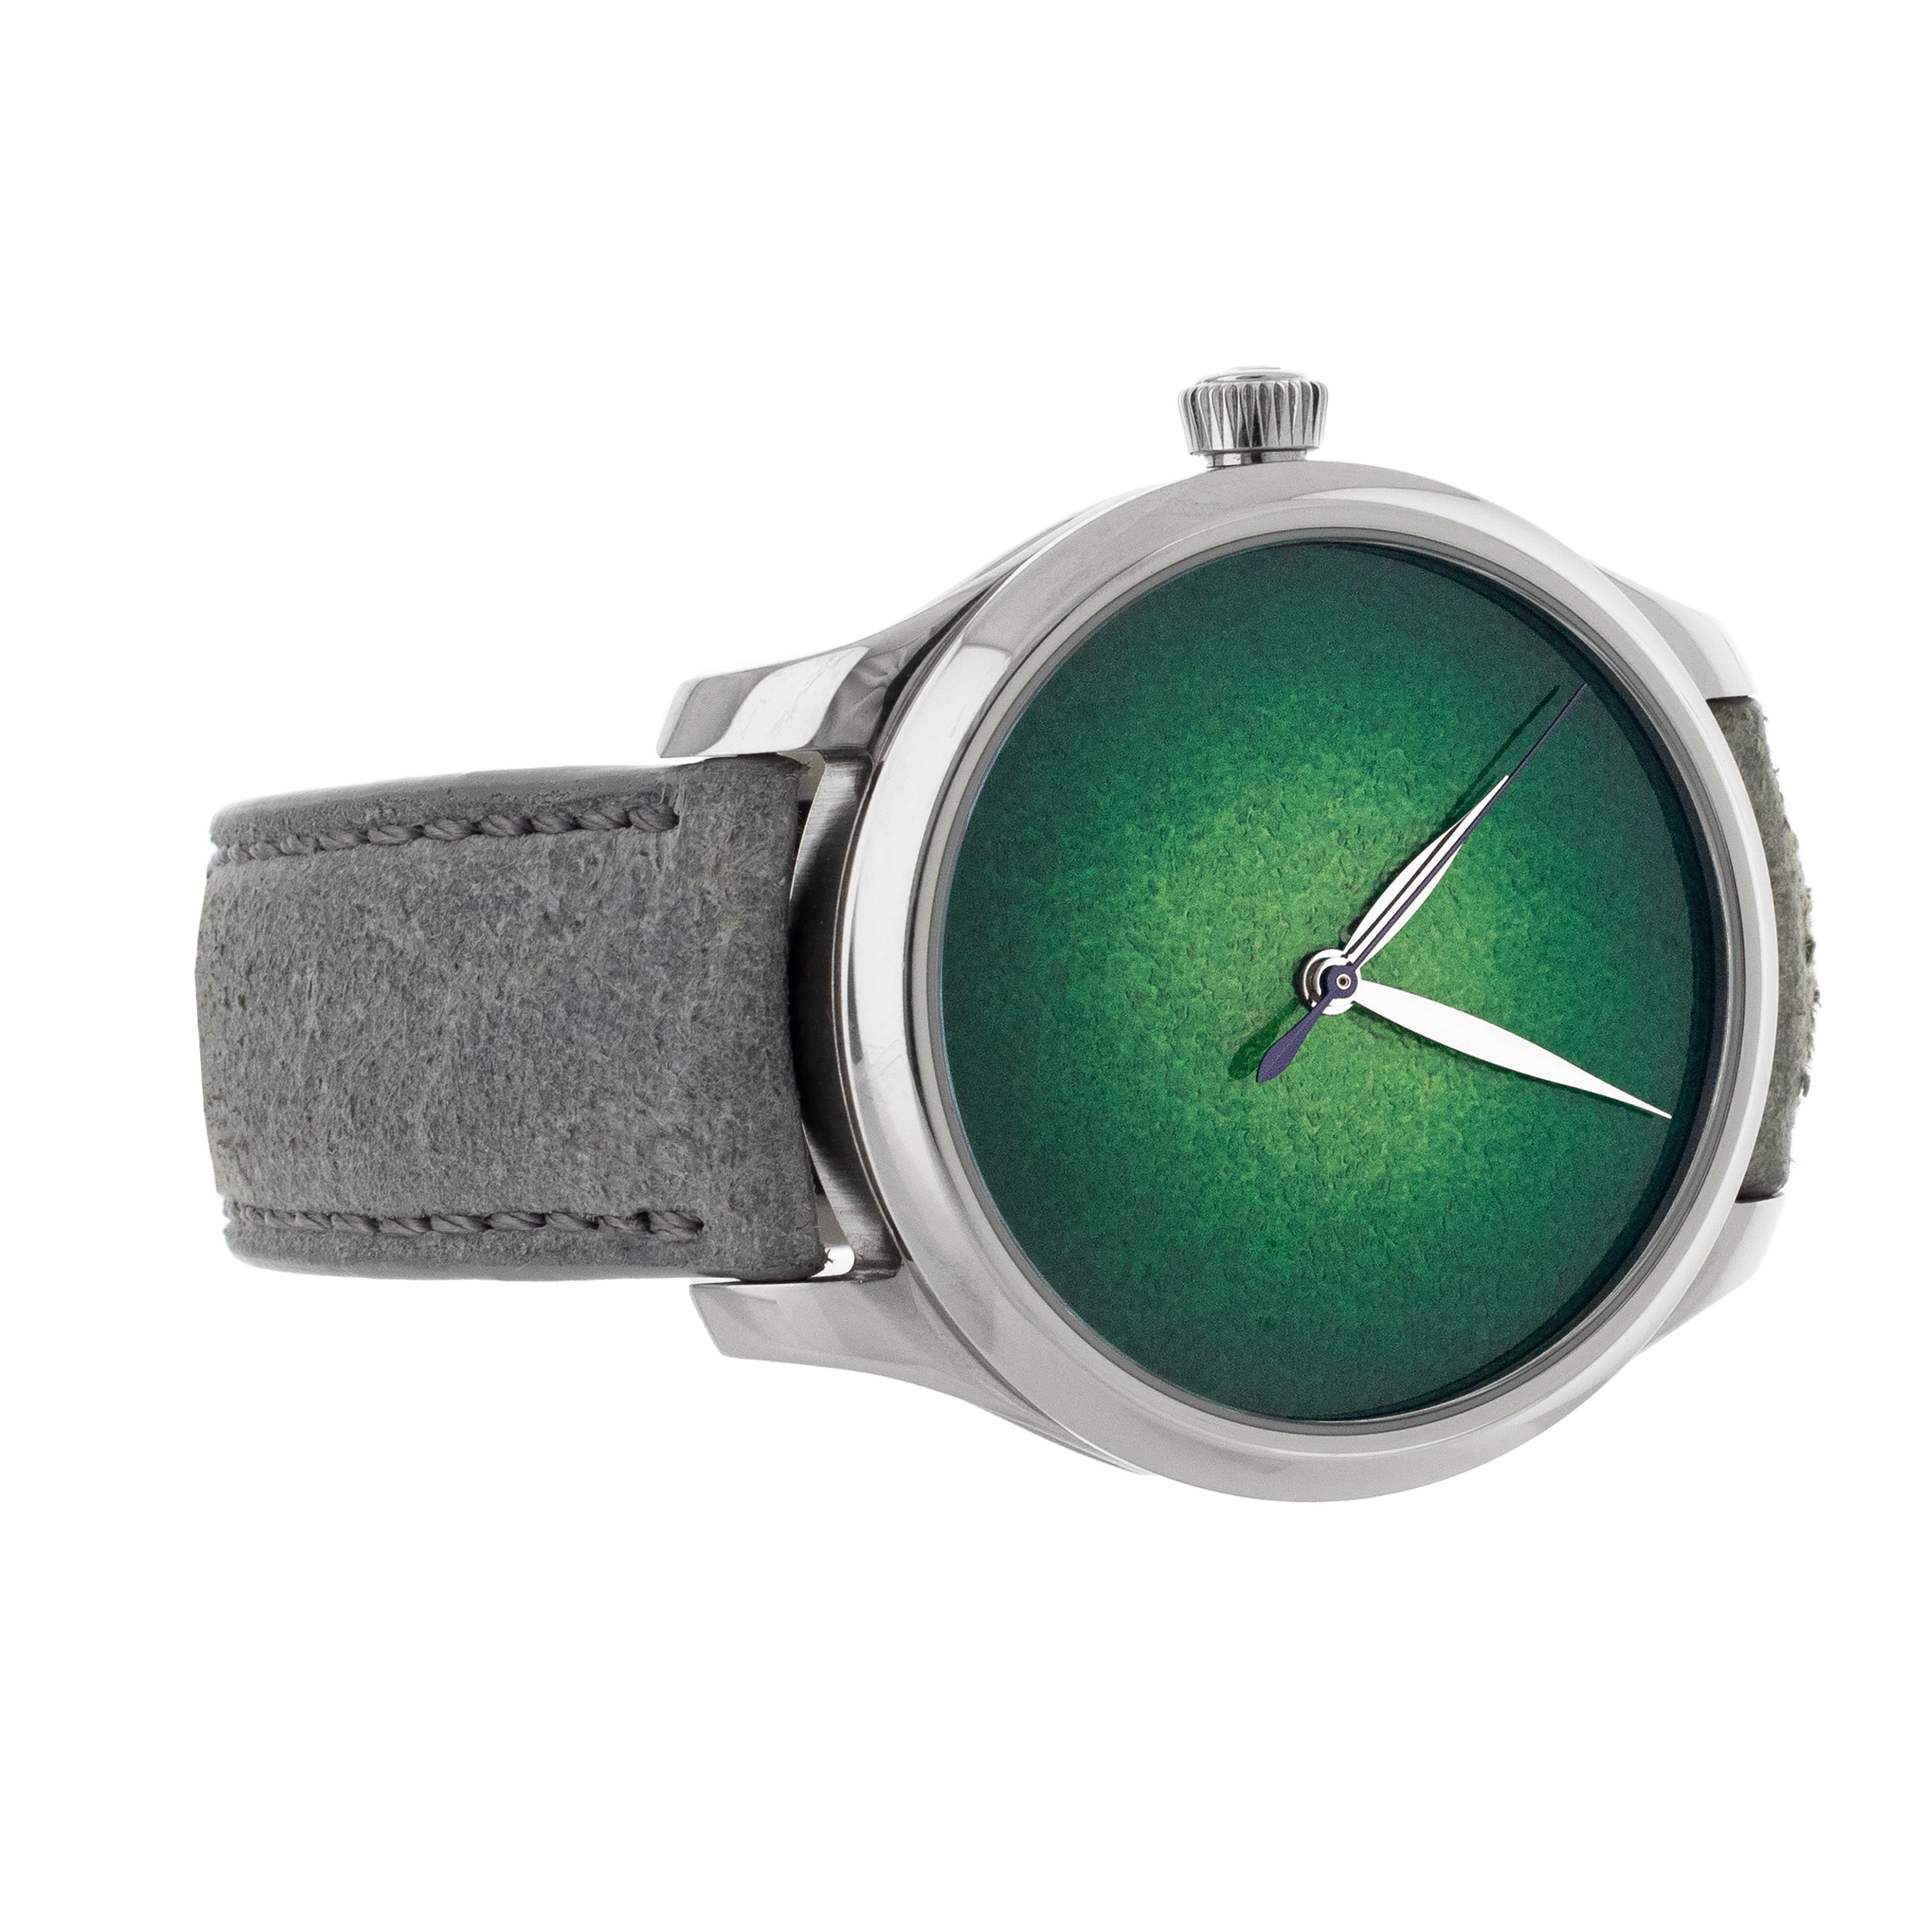 H. Moser & Cie. Endeavour Centre Seconds Stainless steel green dial 40mm 1200-1233 Full set